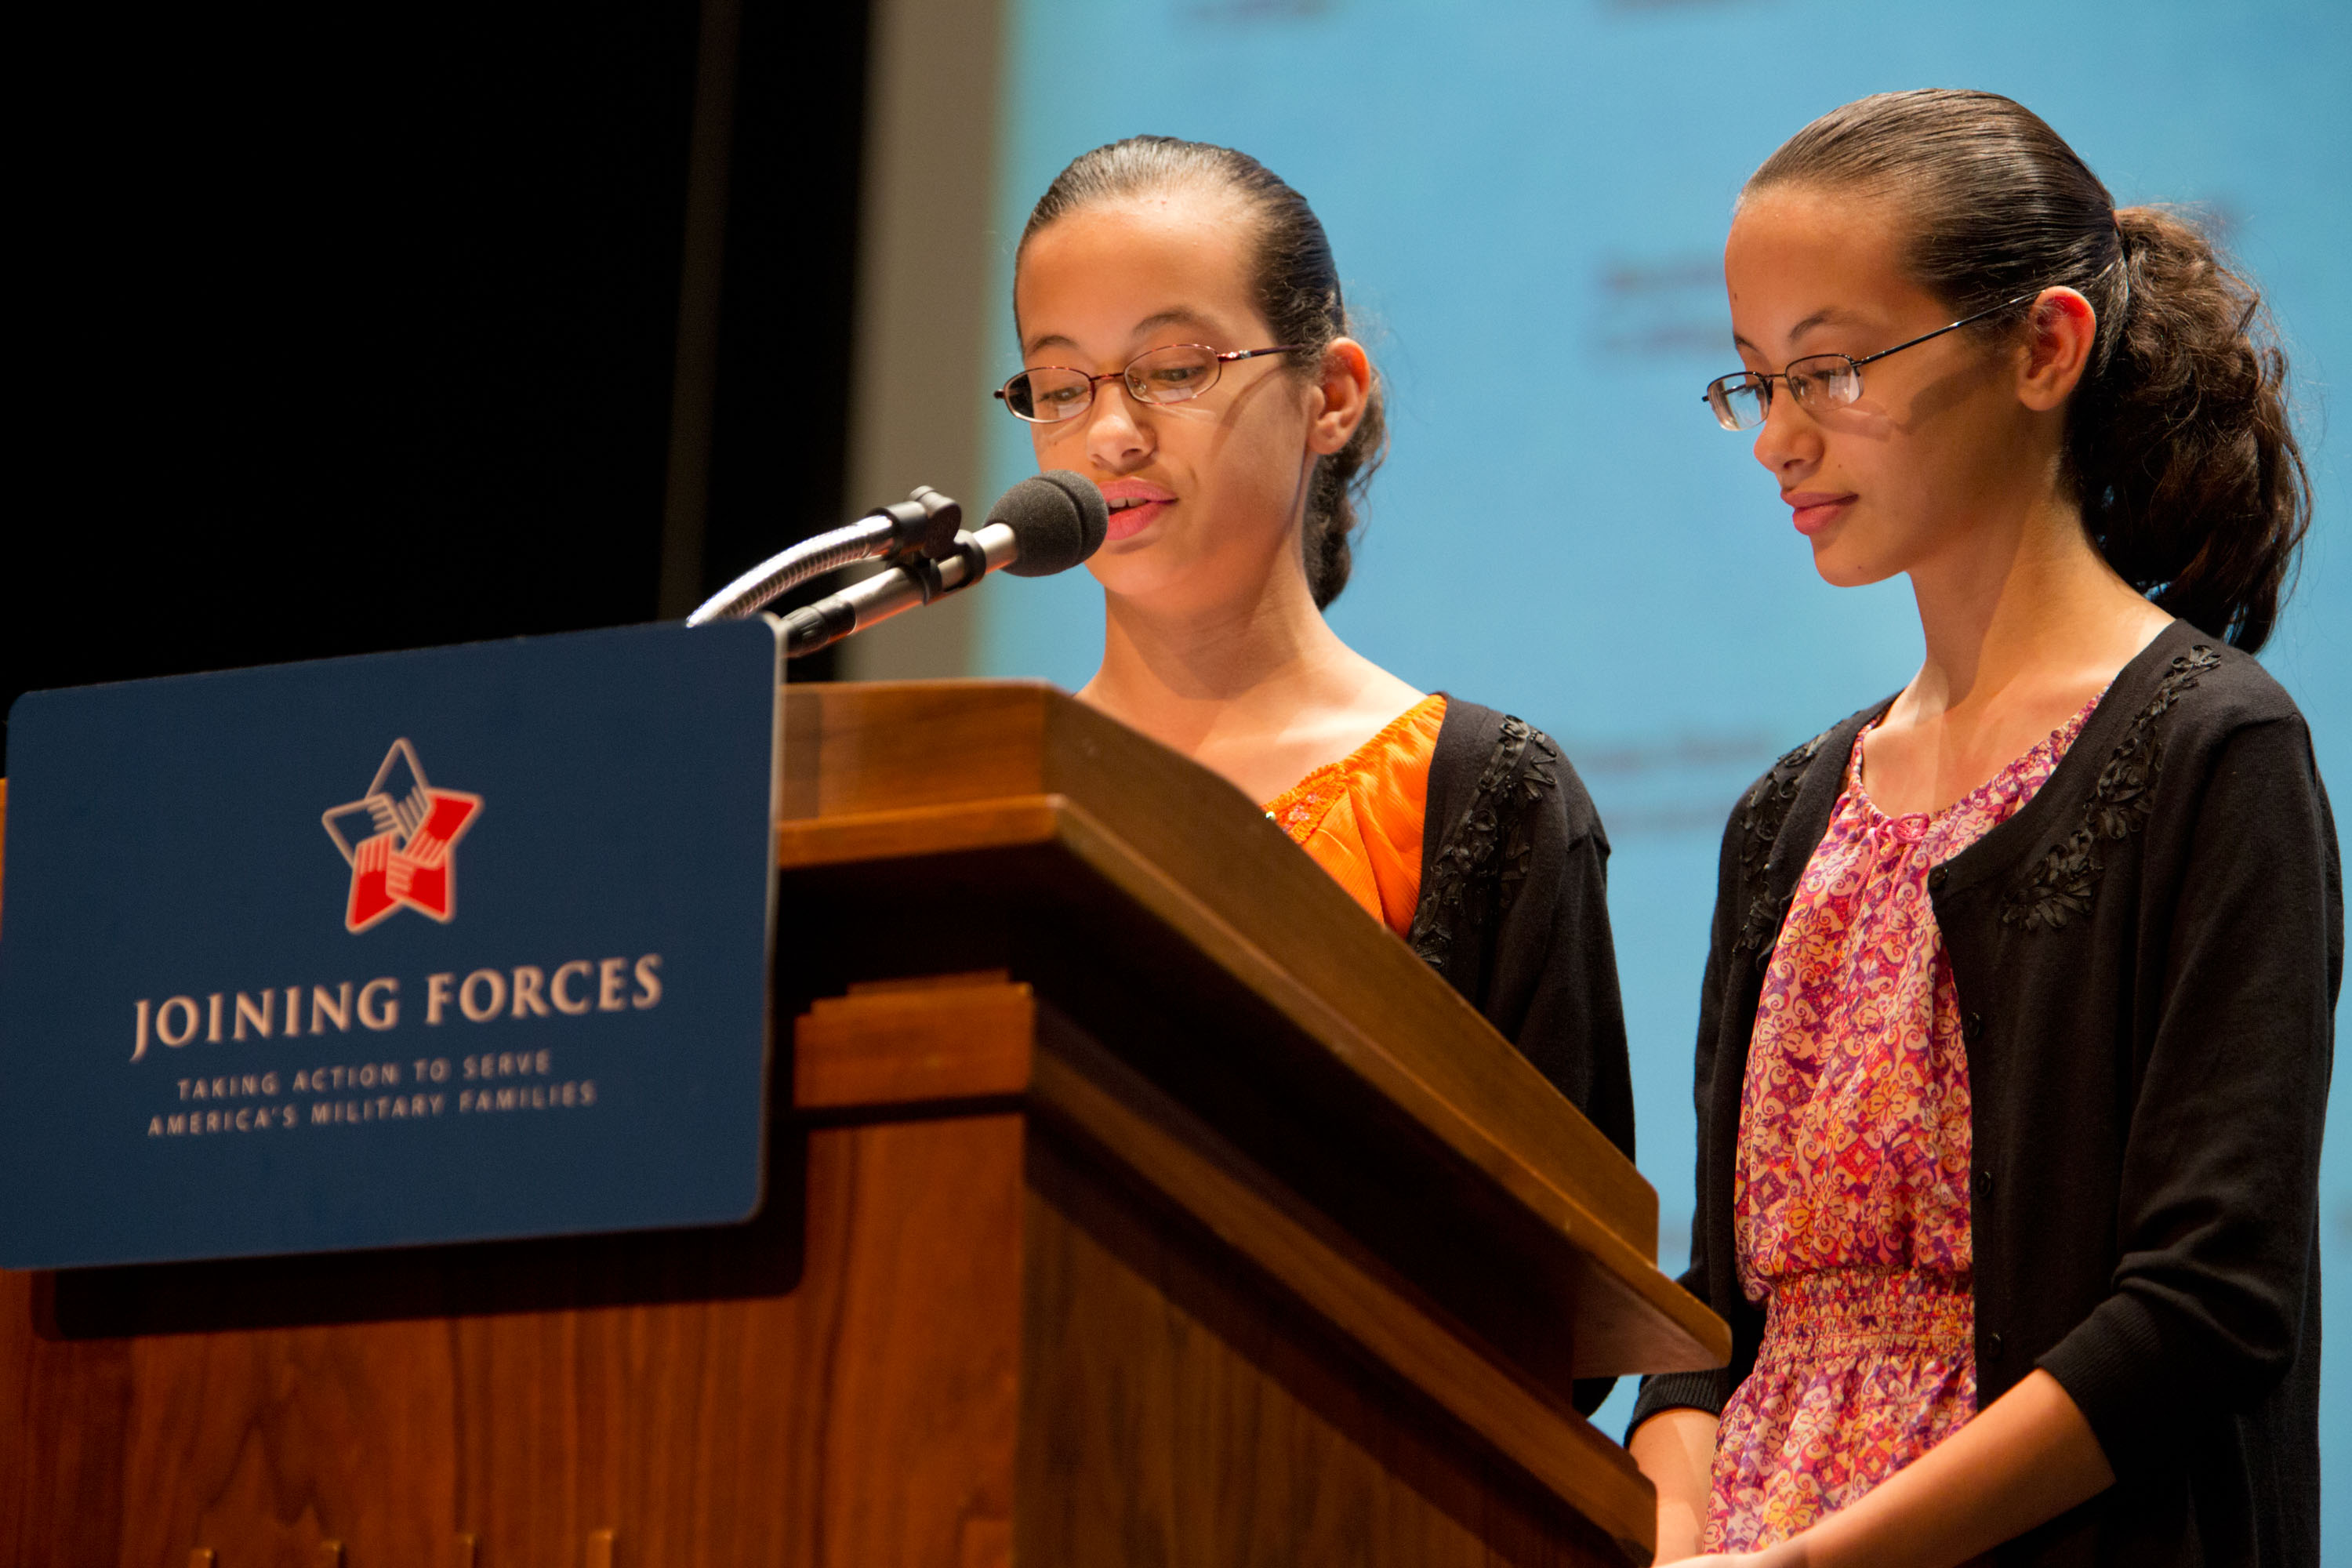 Felicity and Abigail Horan introduce Dr. Jill Biden at a Joining Forces event (October 3, 2012)